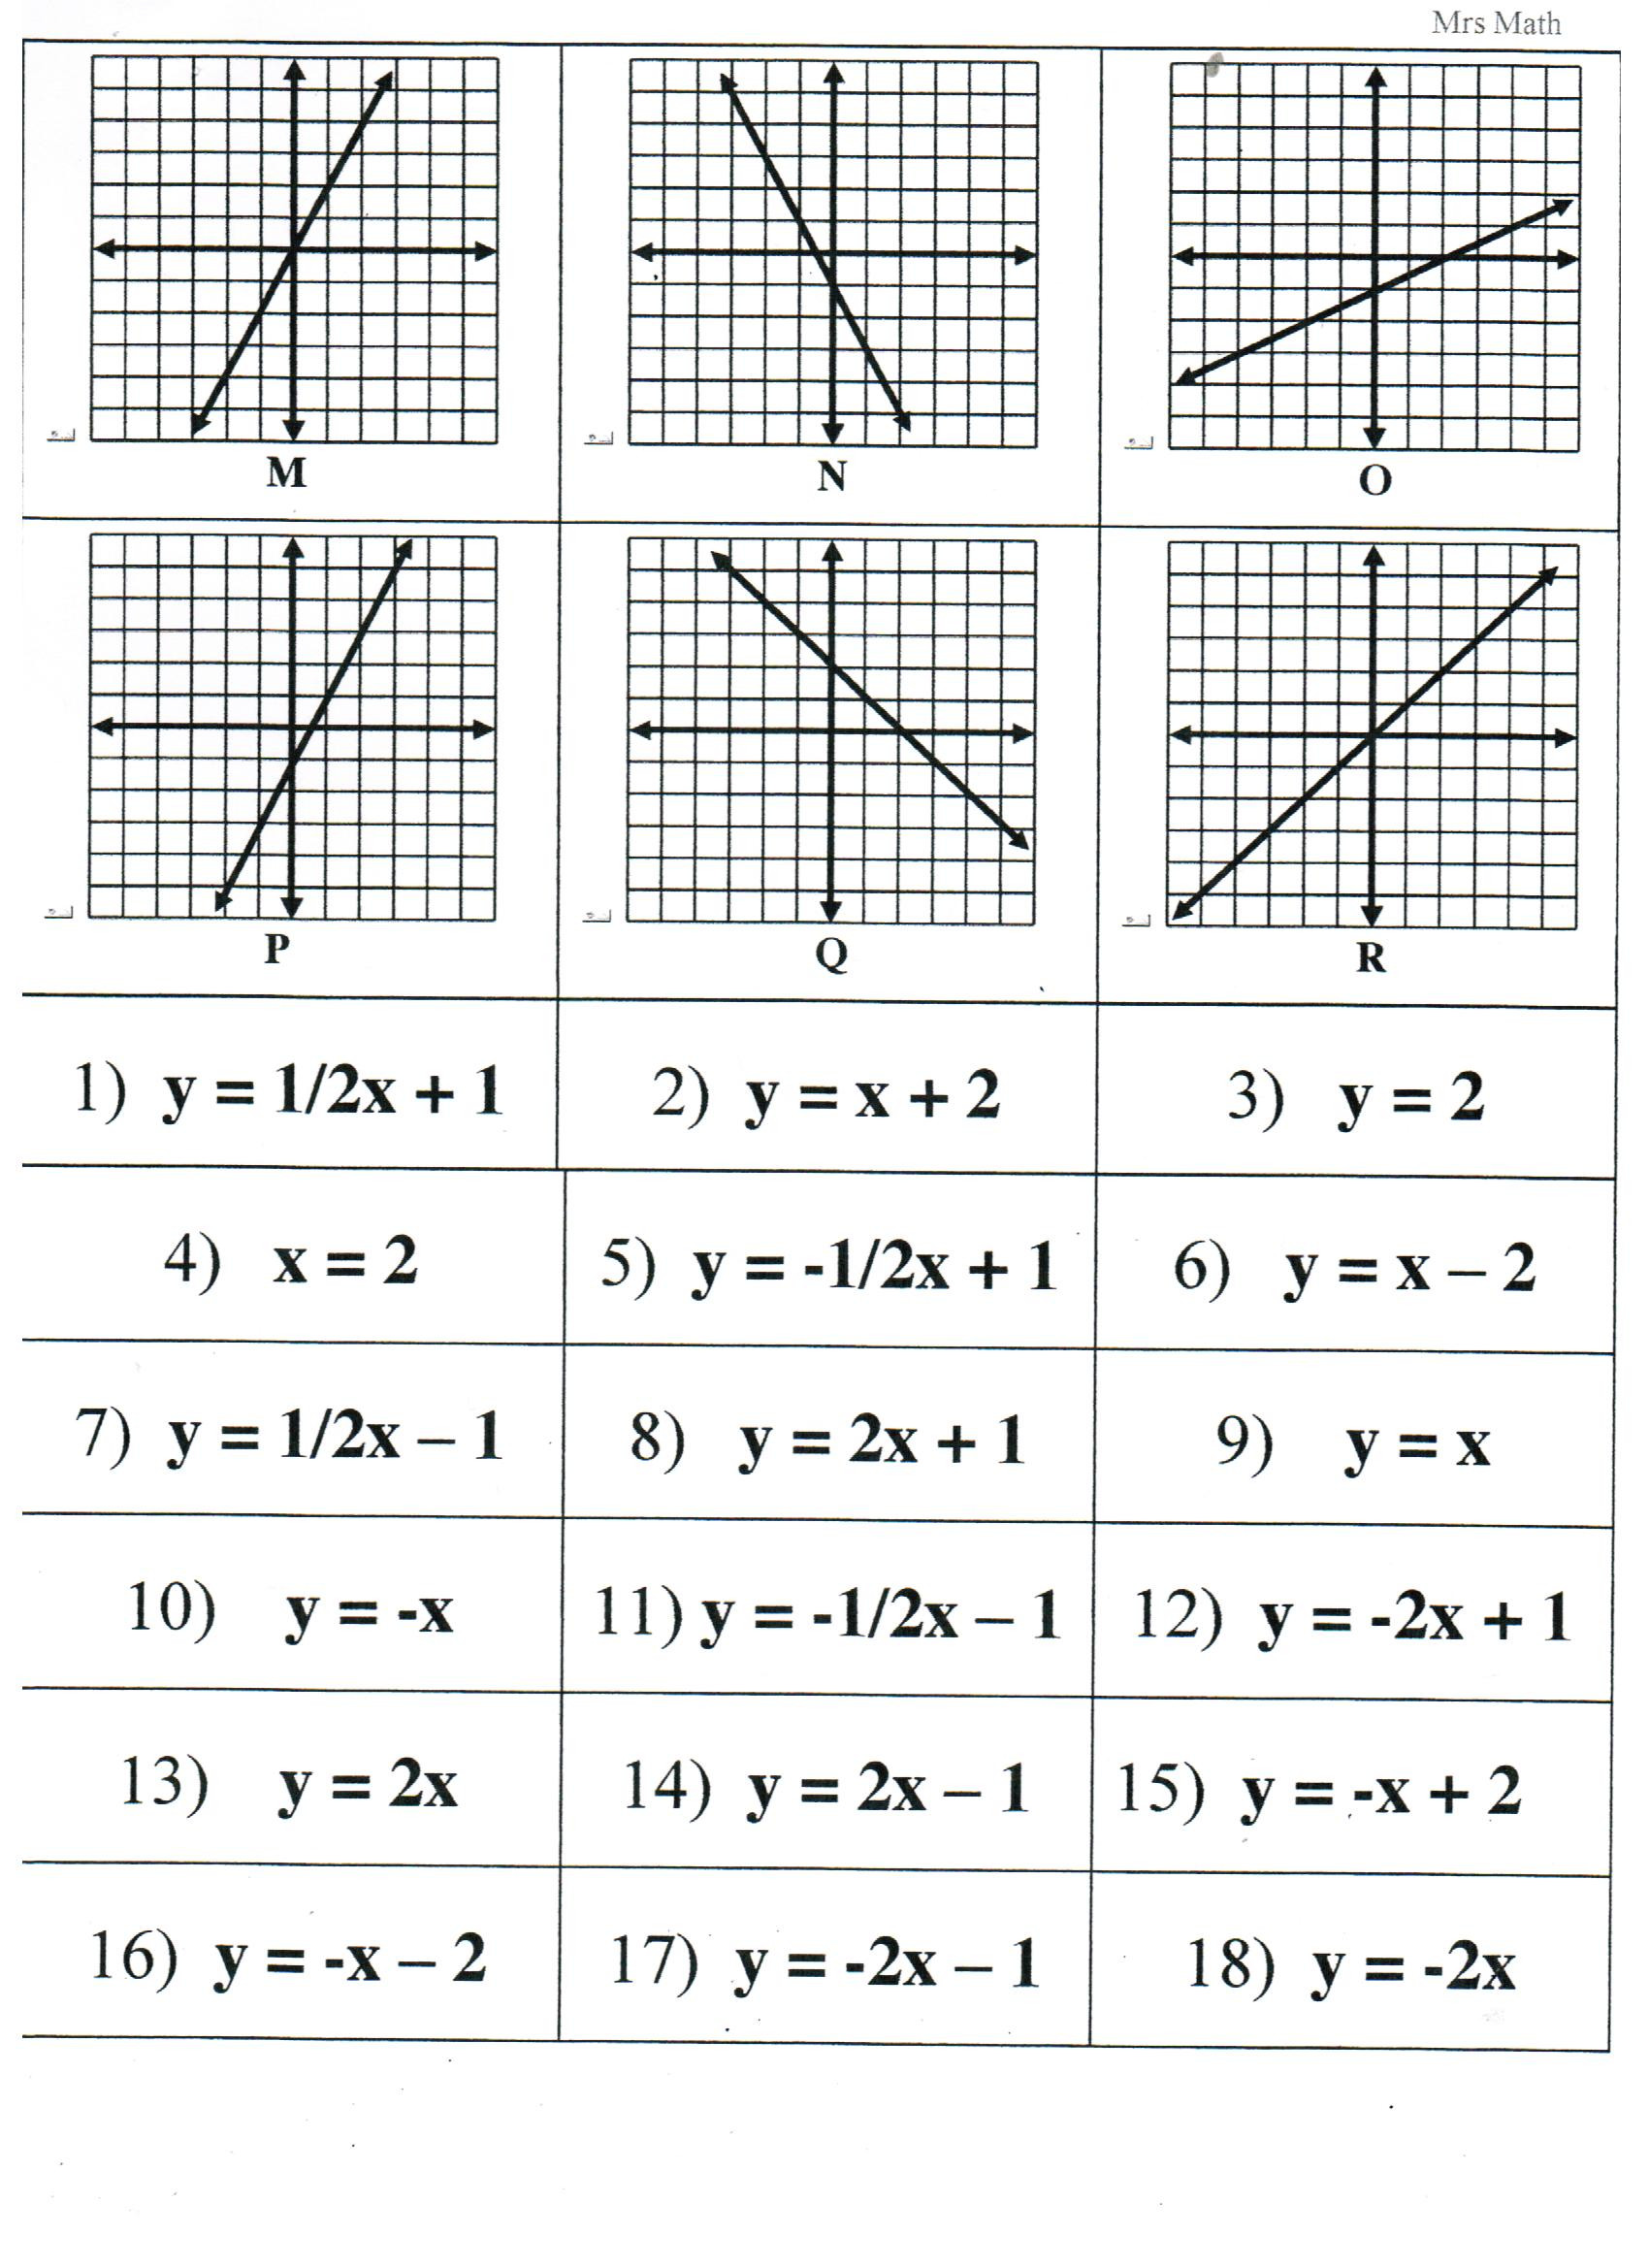 Writing Equations From Tables Worksheet Matching Equations Tables and Graphs Key Tessshebaylo